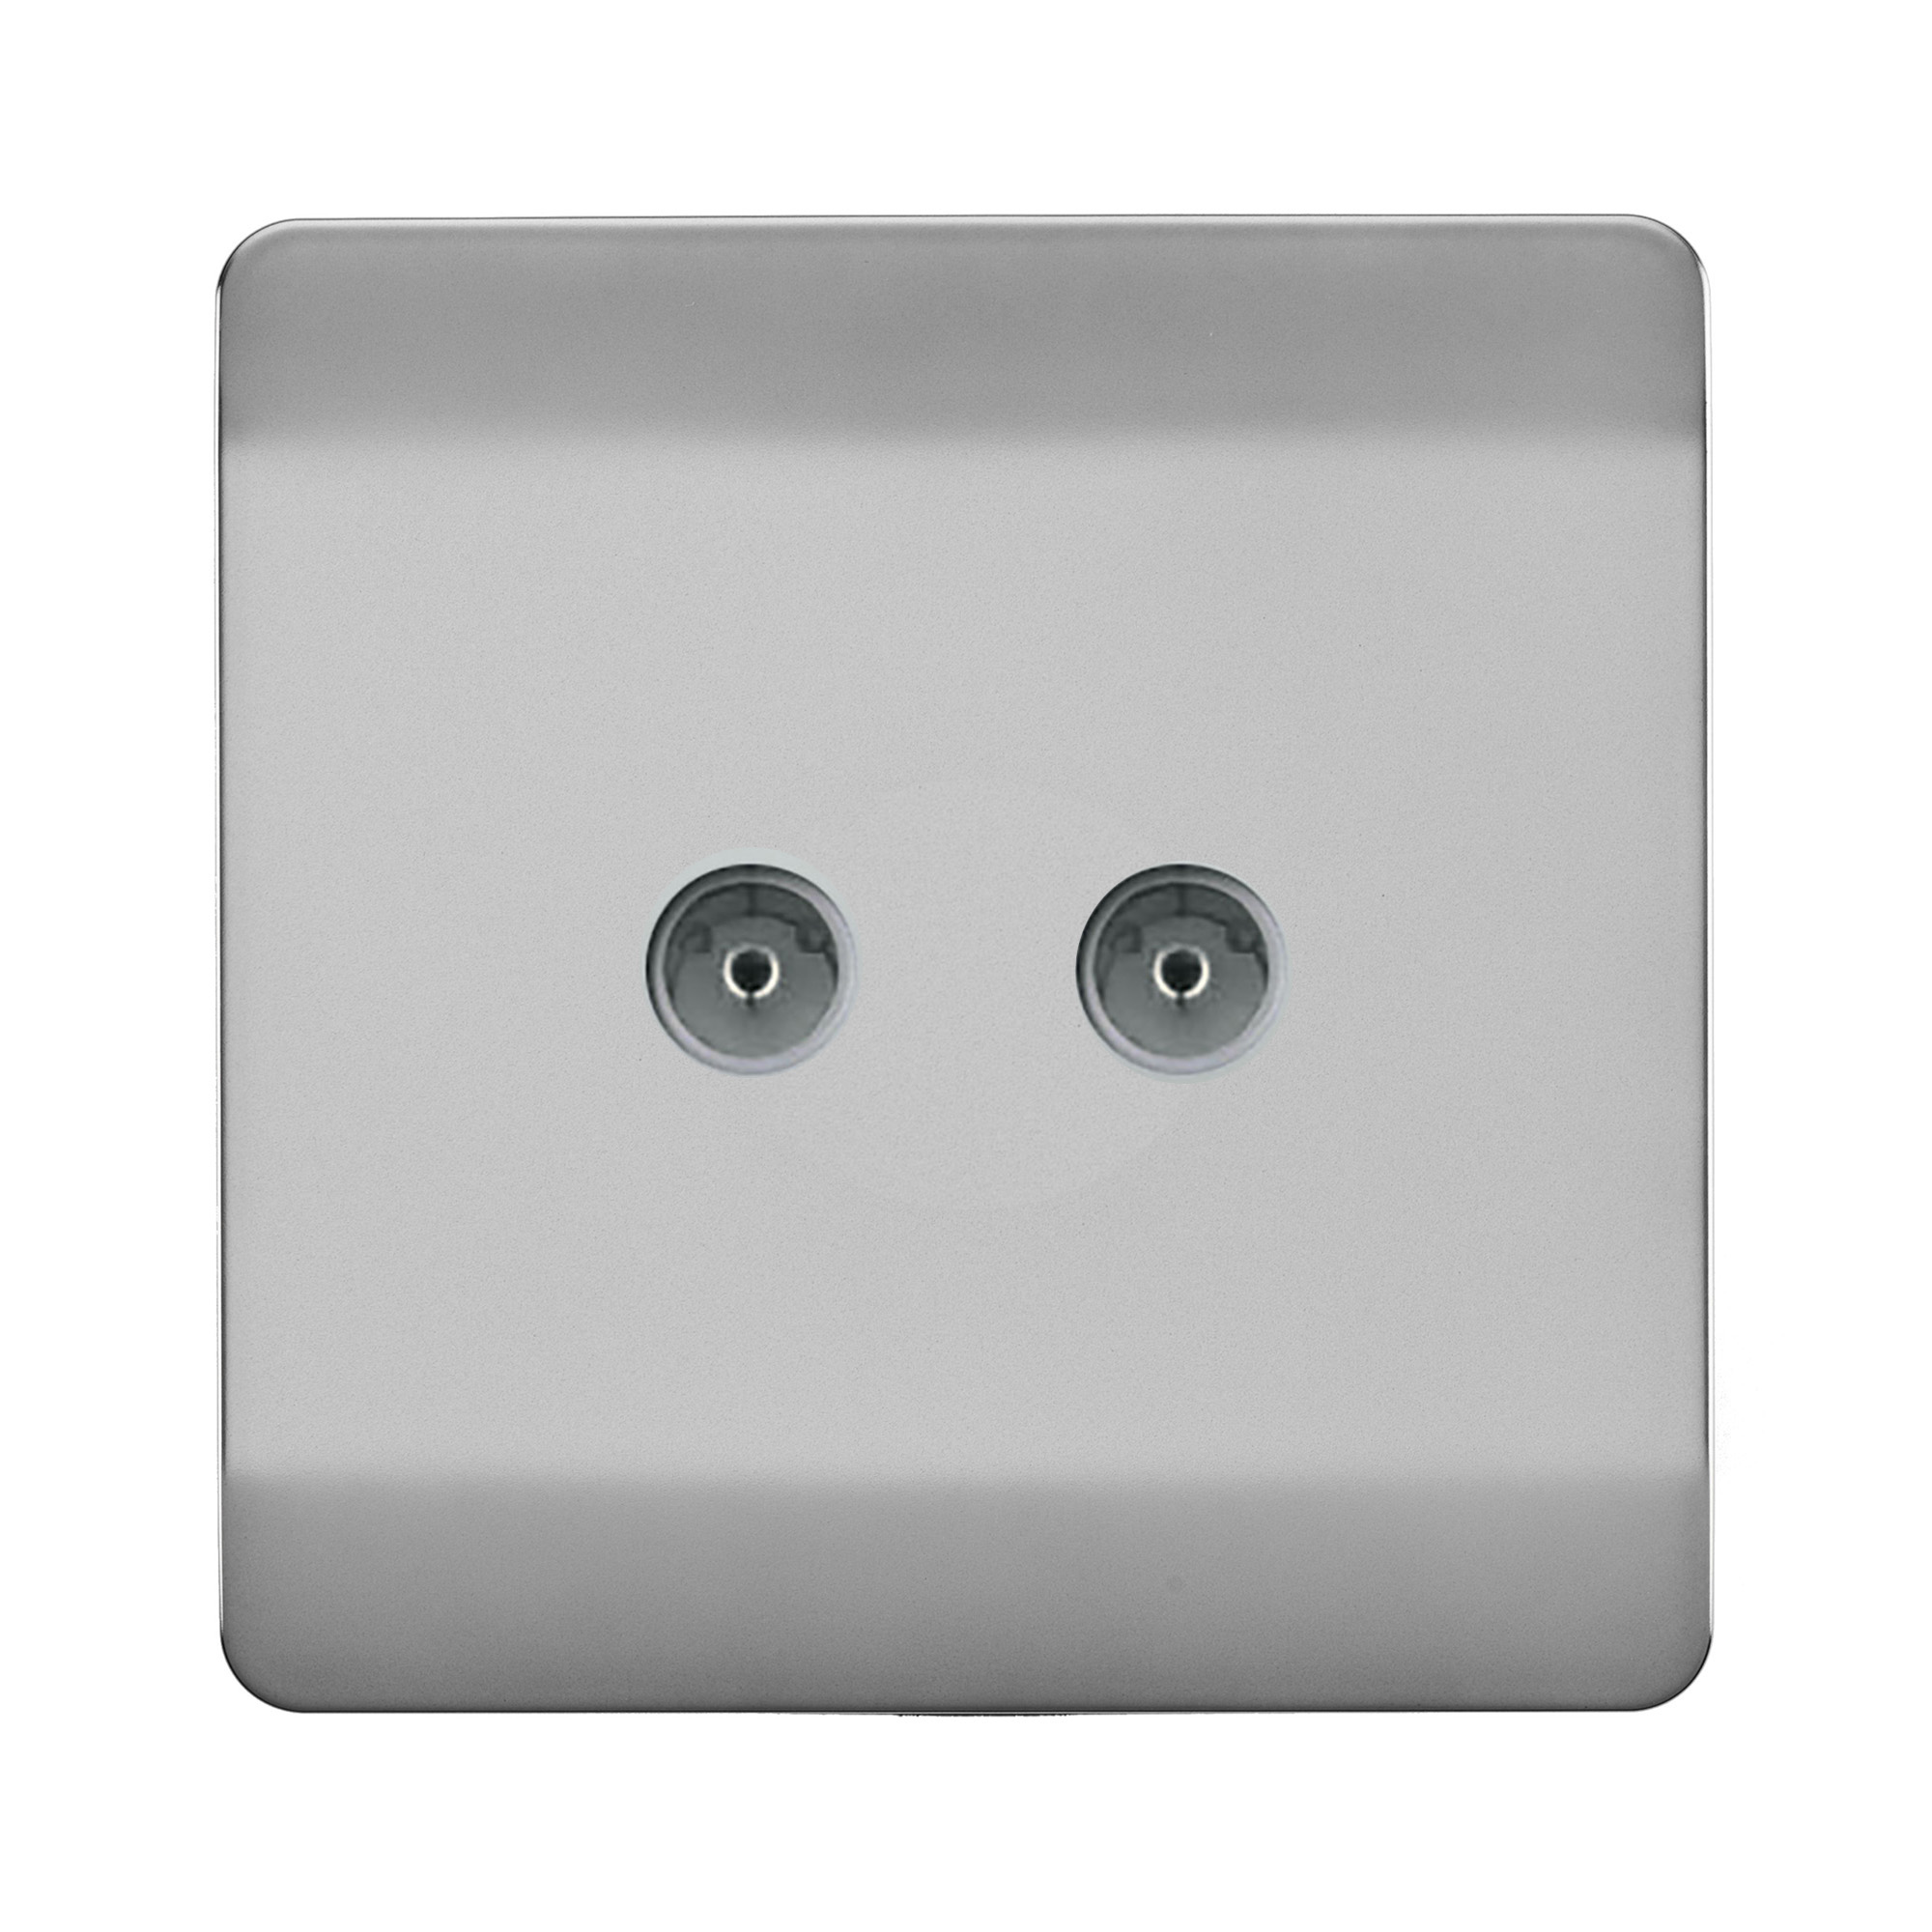 ART-2TVSBS  Twin TV Co-Axial Outlet Brushed Steel